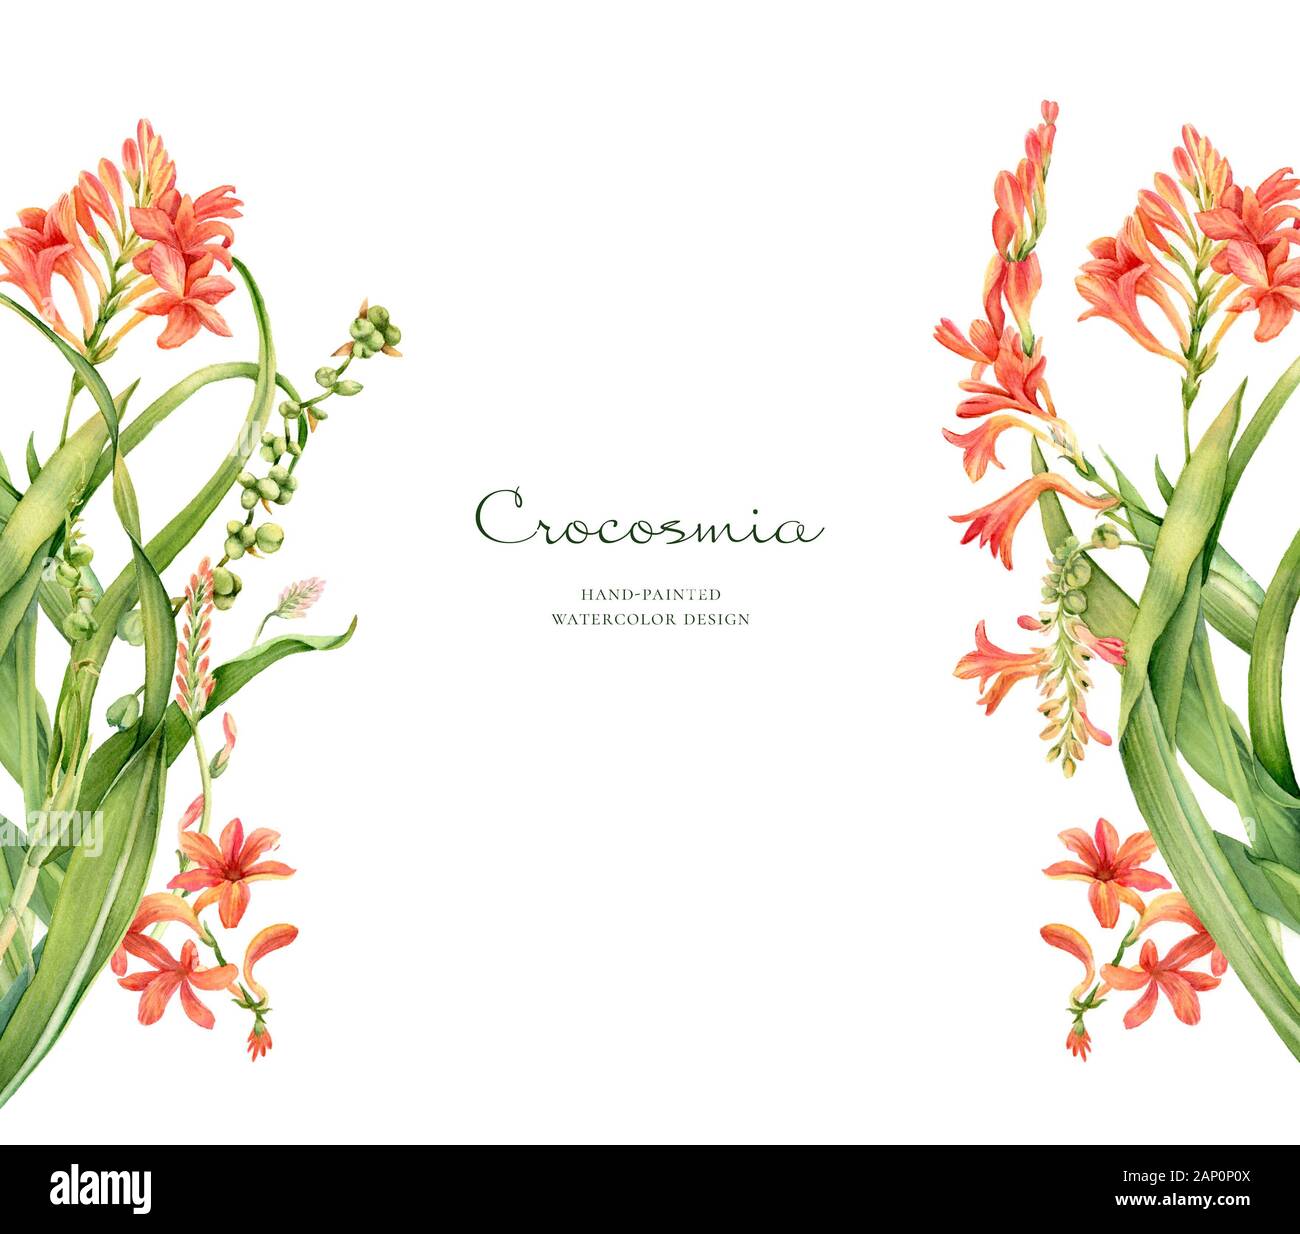 Watercolor floral banner. Colourful crocosmia flower isolated on white and place for text. Realistic botanical illustration for wedding design Stock Photo